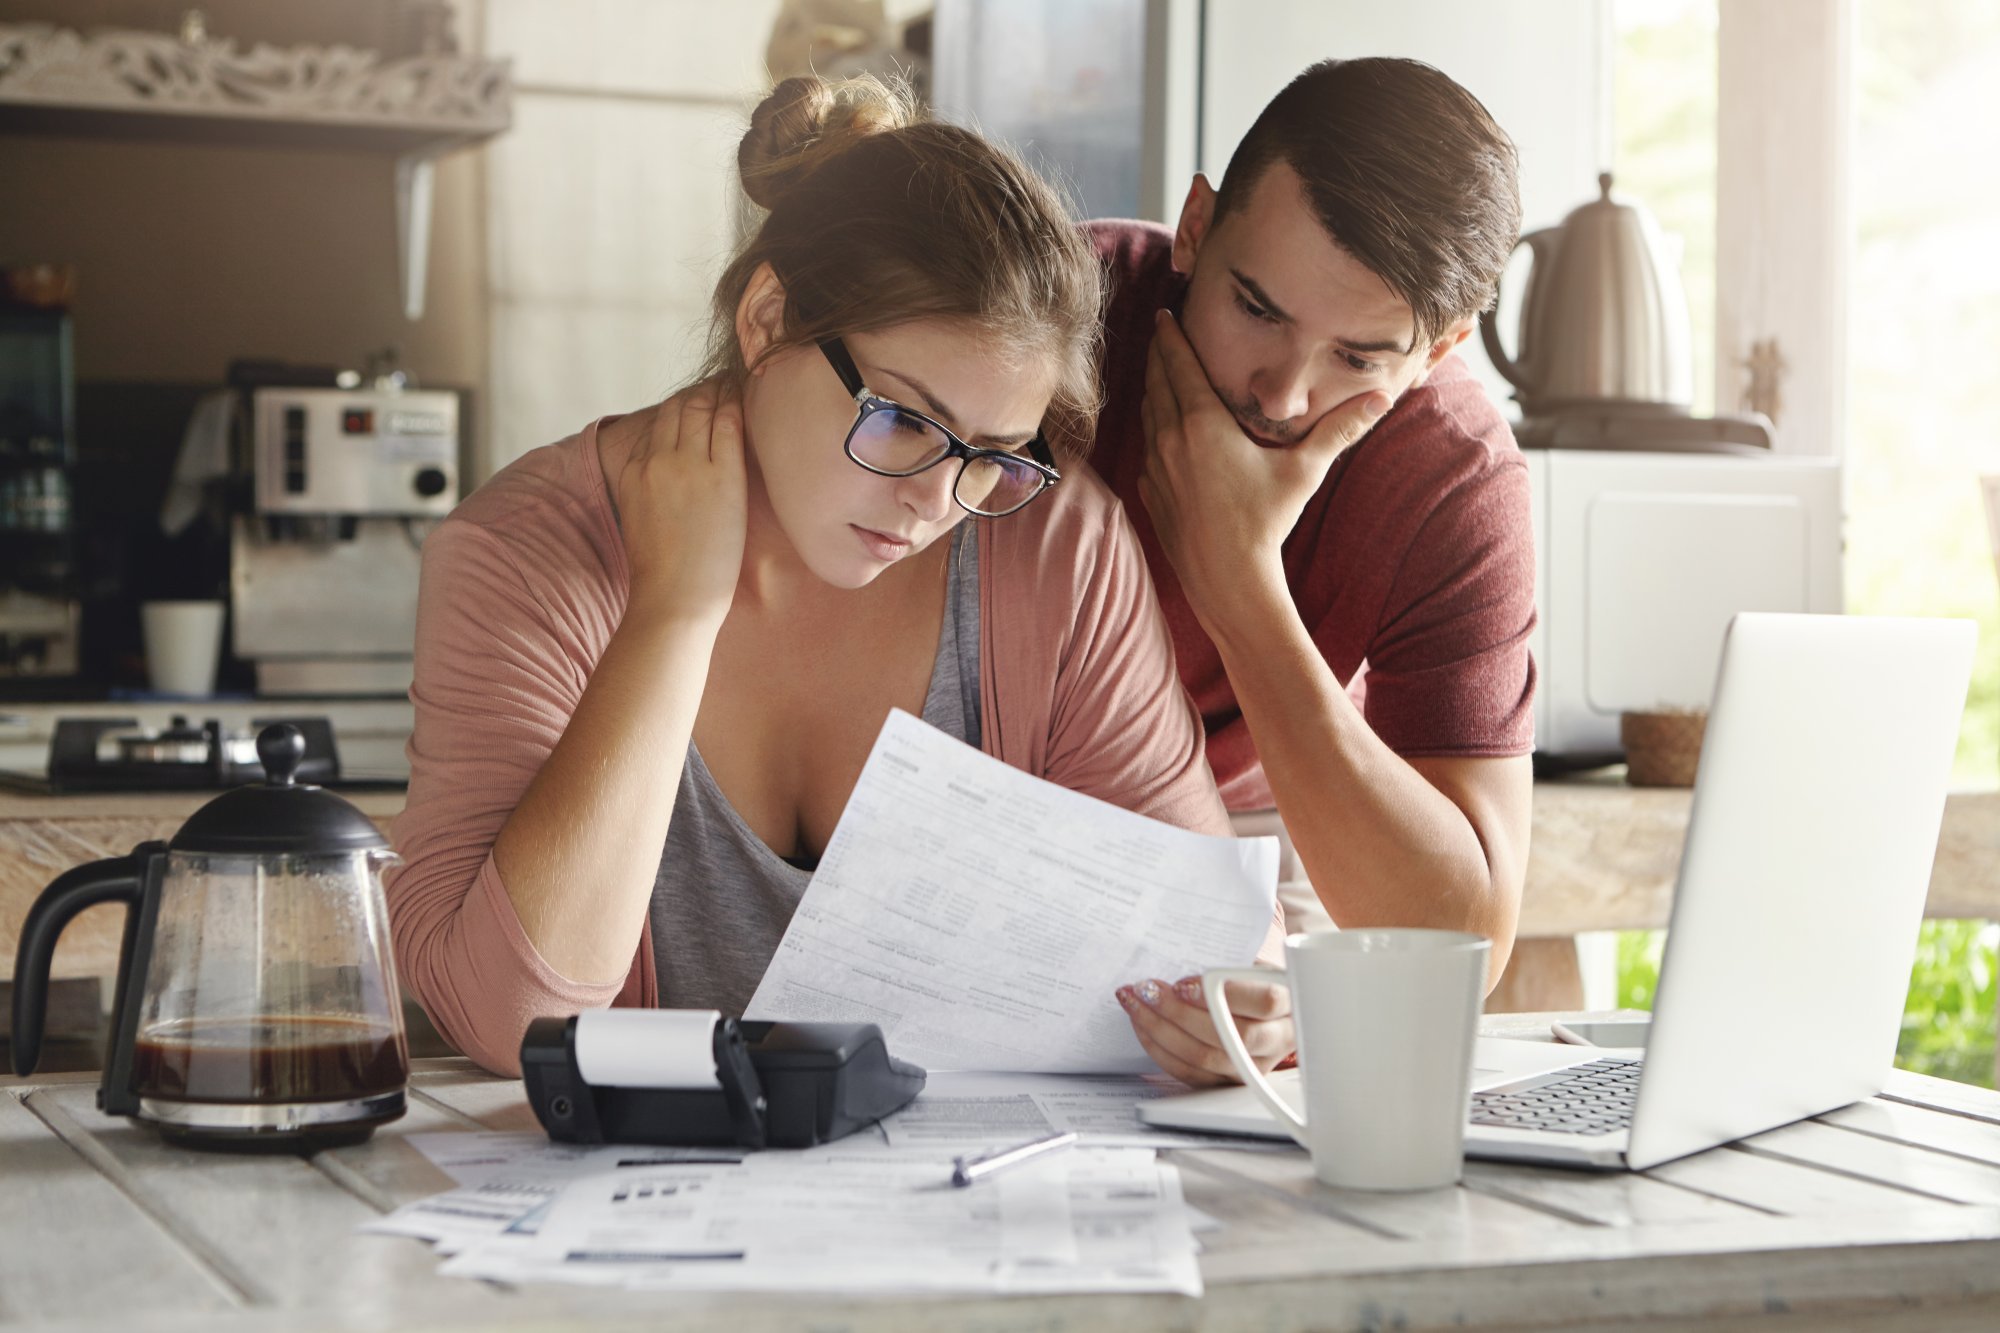 young-caucasian-family-having-debt-problems-able-pay-out-their-loan-female-glasses-brunette-man-studying-paper-form-bank-while-managing-domestic-budget-together-kitchen-interior.jpg